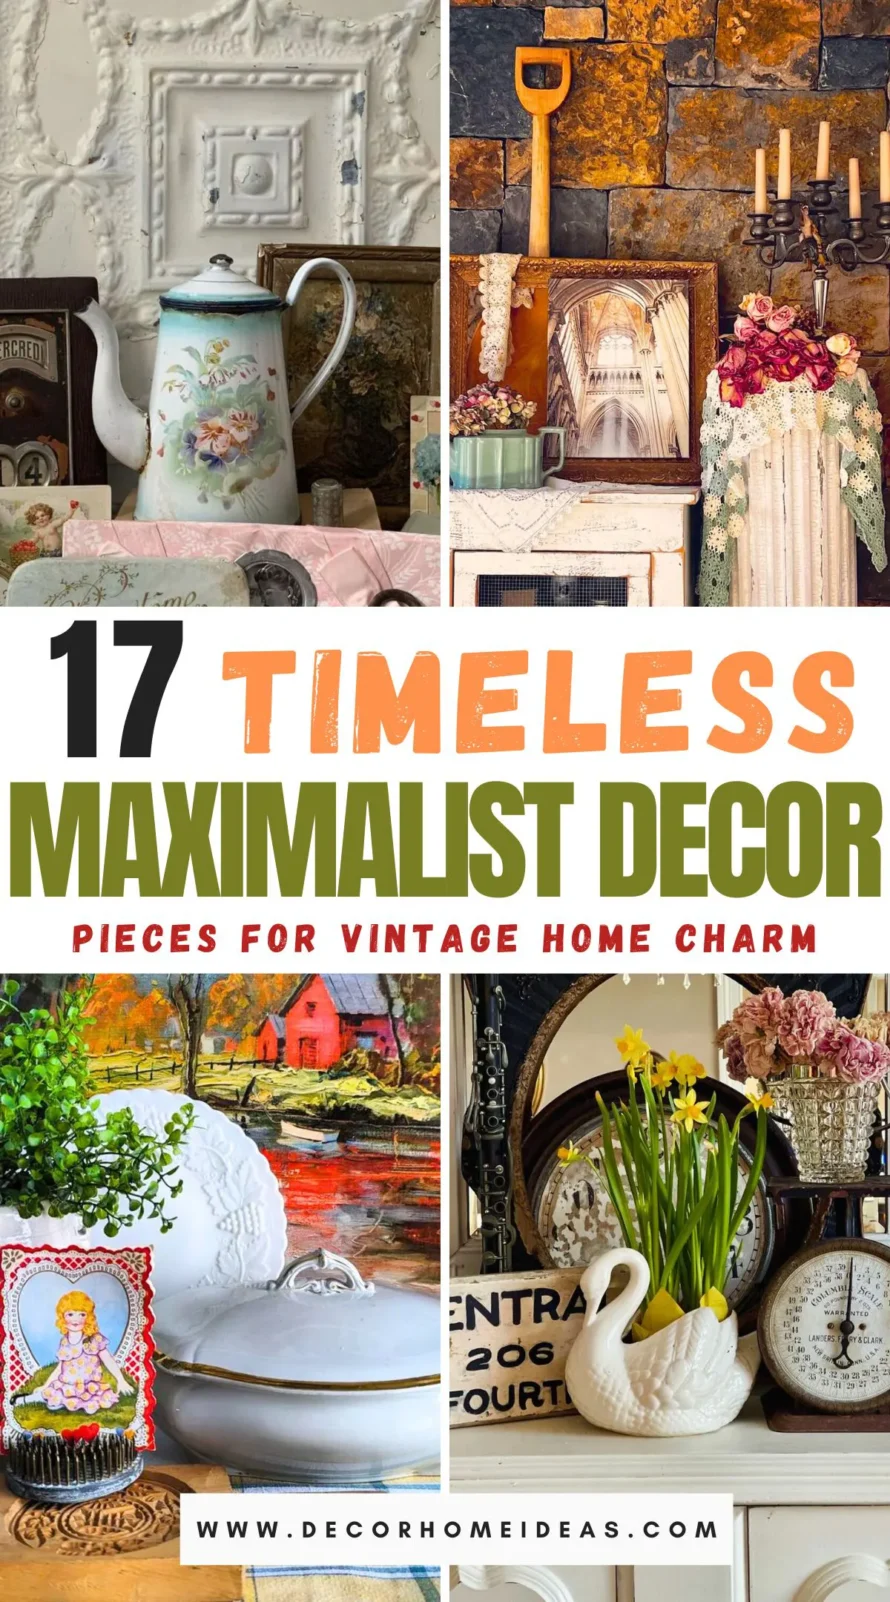 17 Timeless Maximalist Decor Pieces that Add a Vintage Charm to Your Home